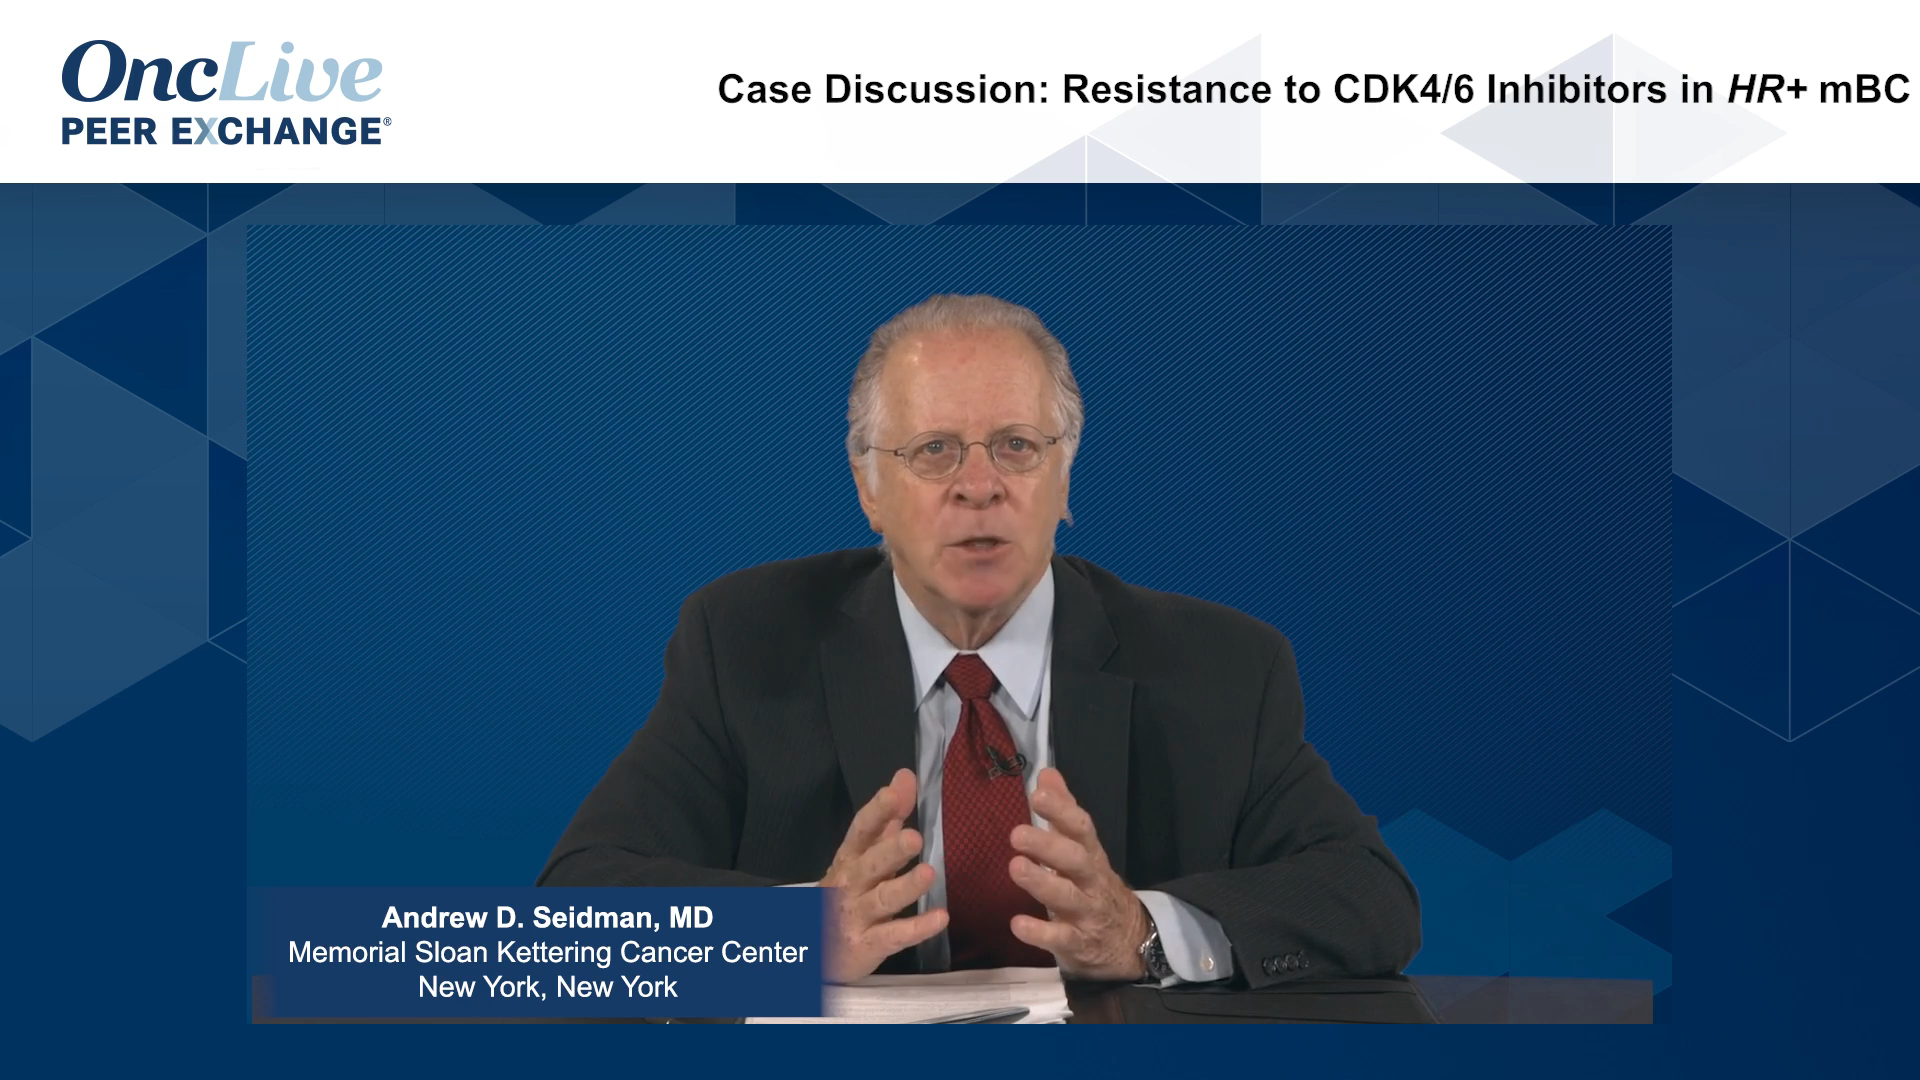 Case Discussion: Resistance to CDK4/6 Inhibitors in HR+ mBC